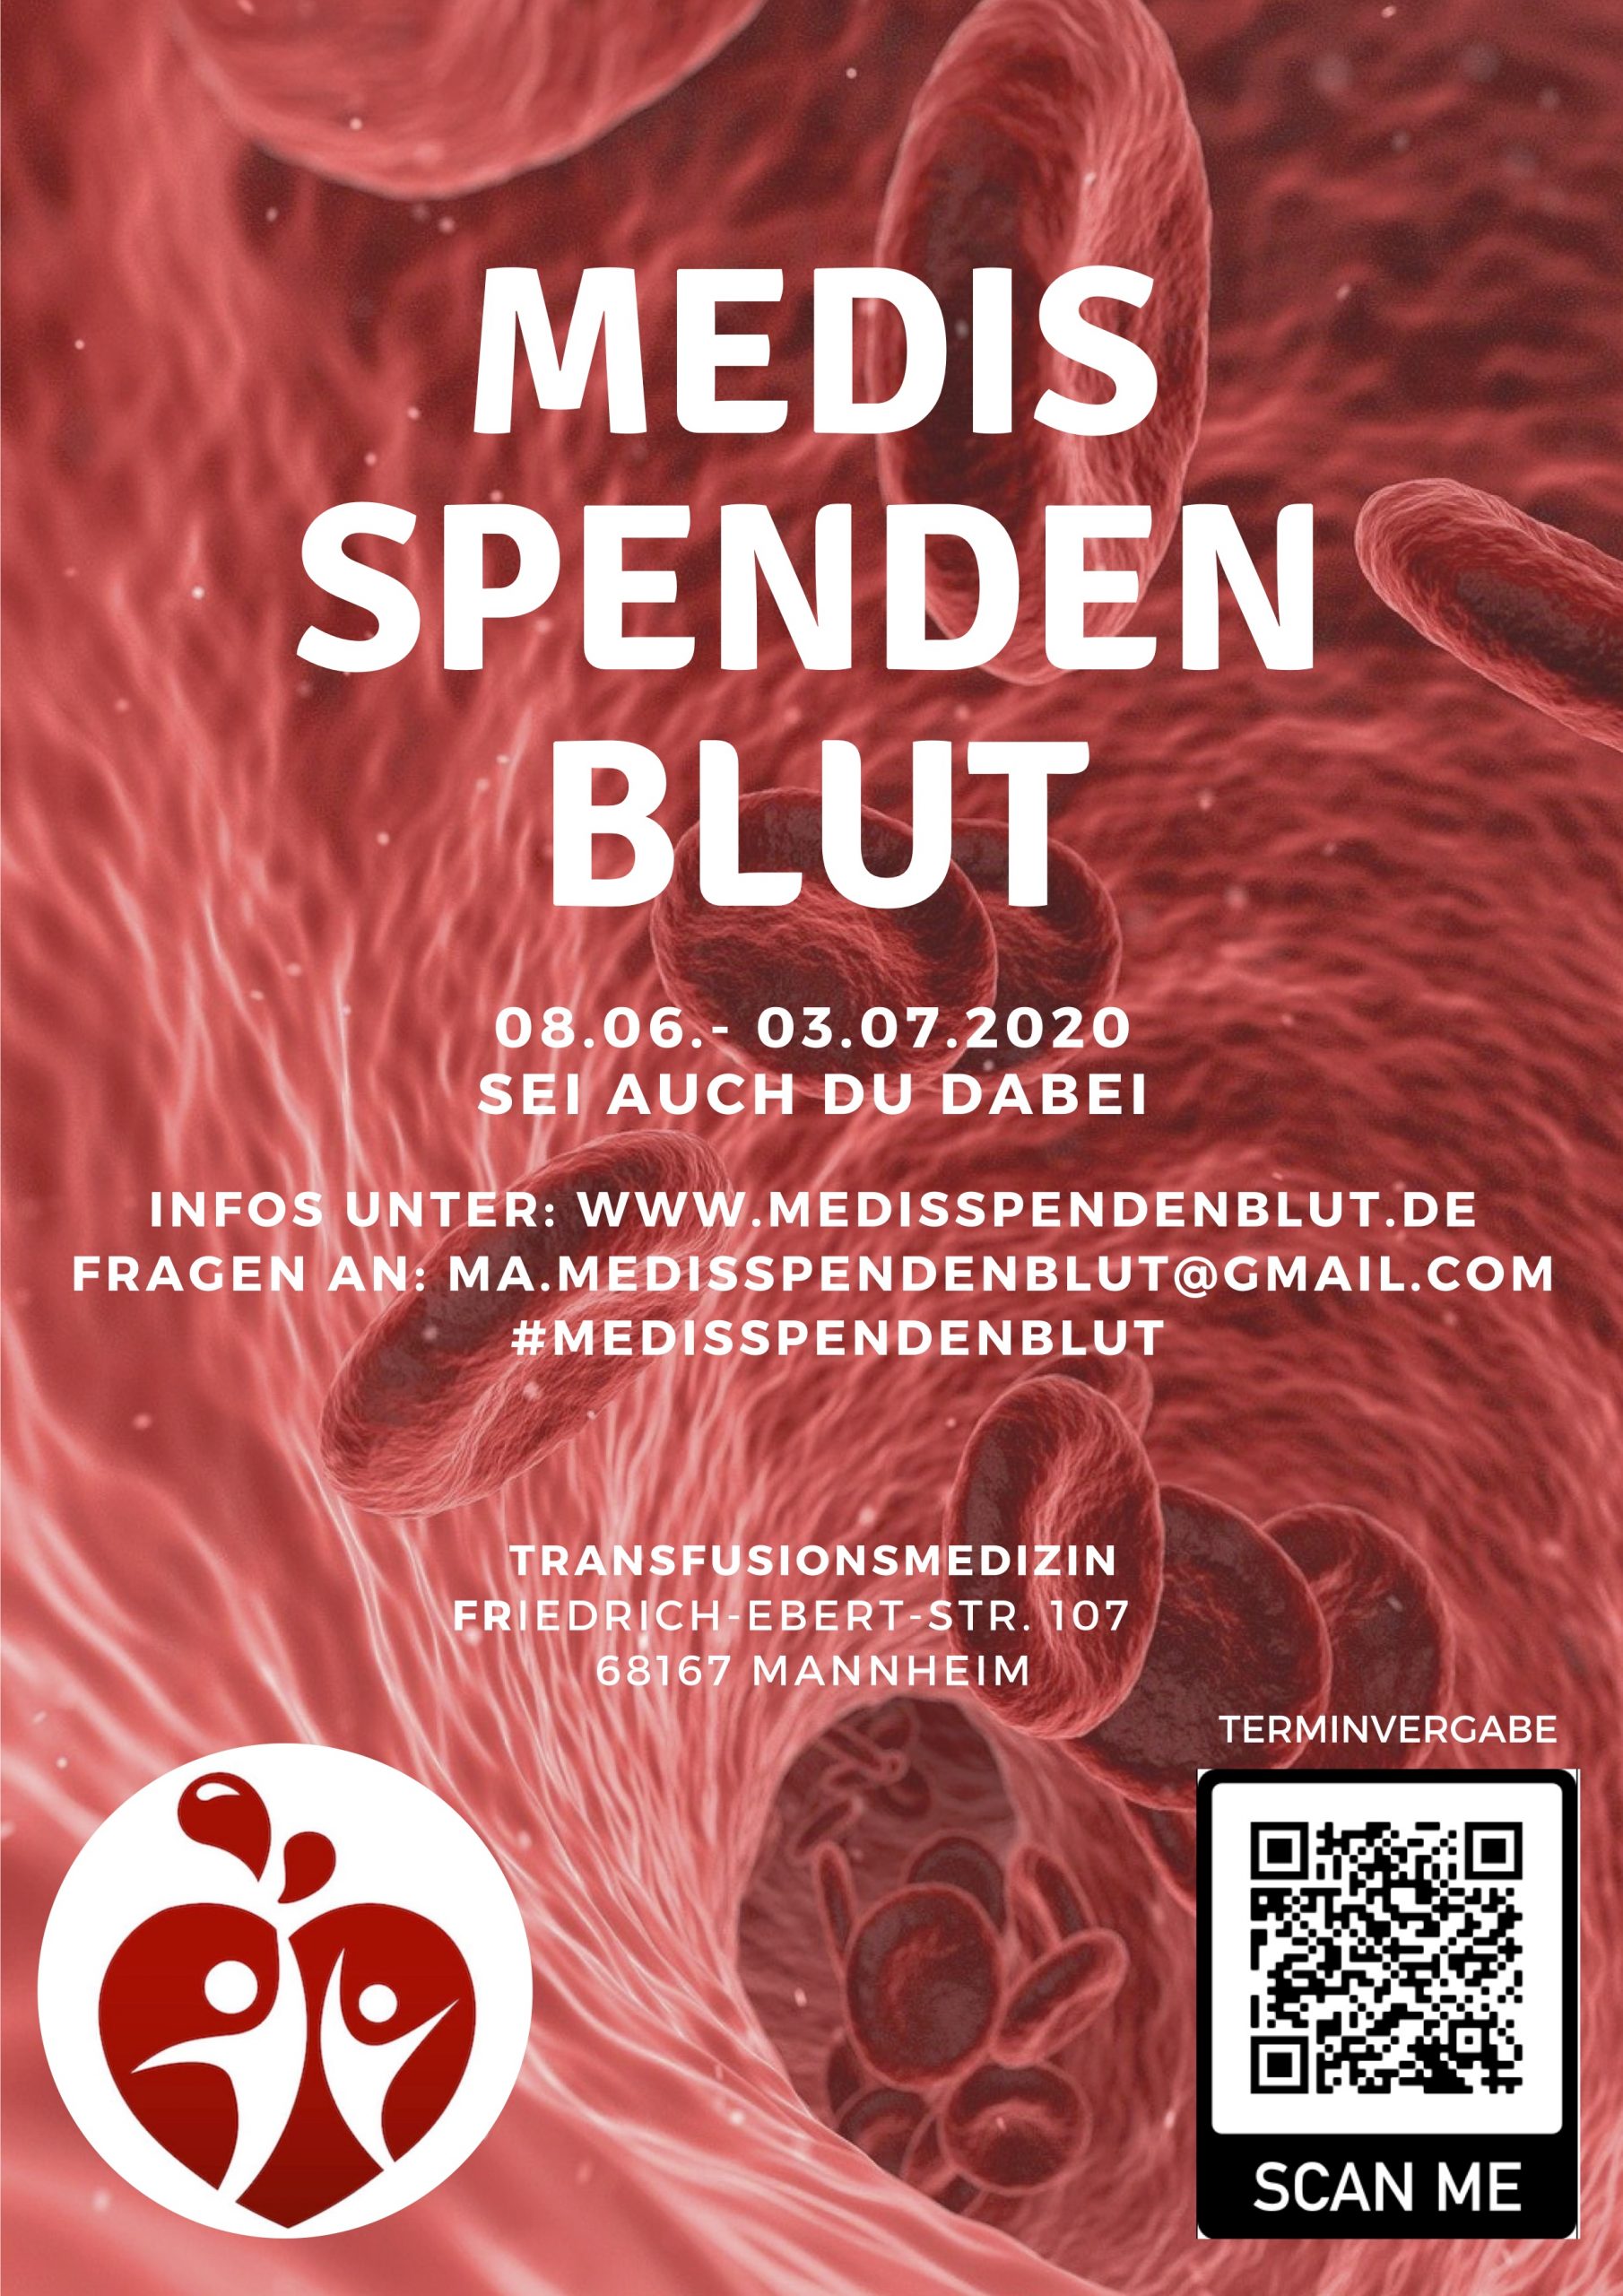 You are currently viewing Medis Spenden Blut – ab dem 08.06.2020